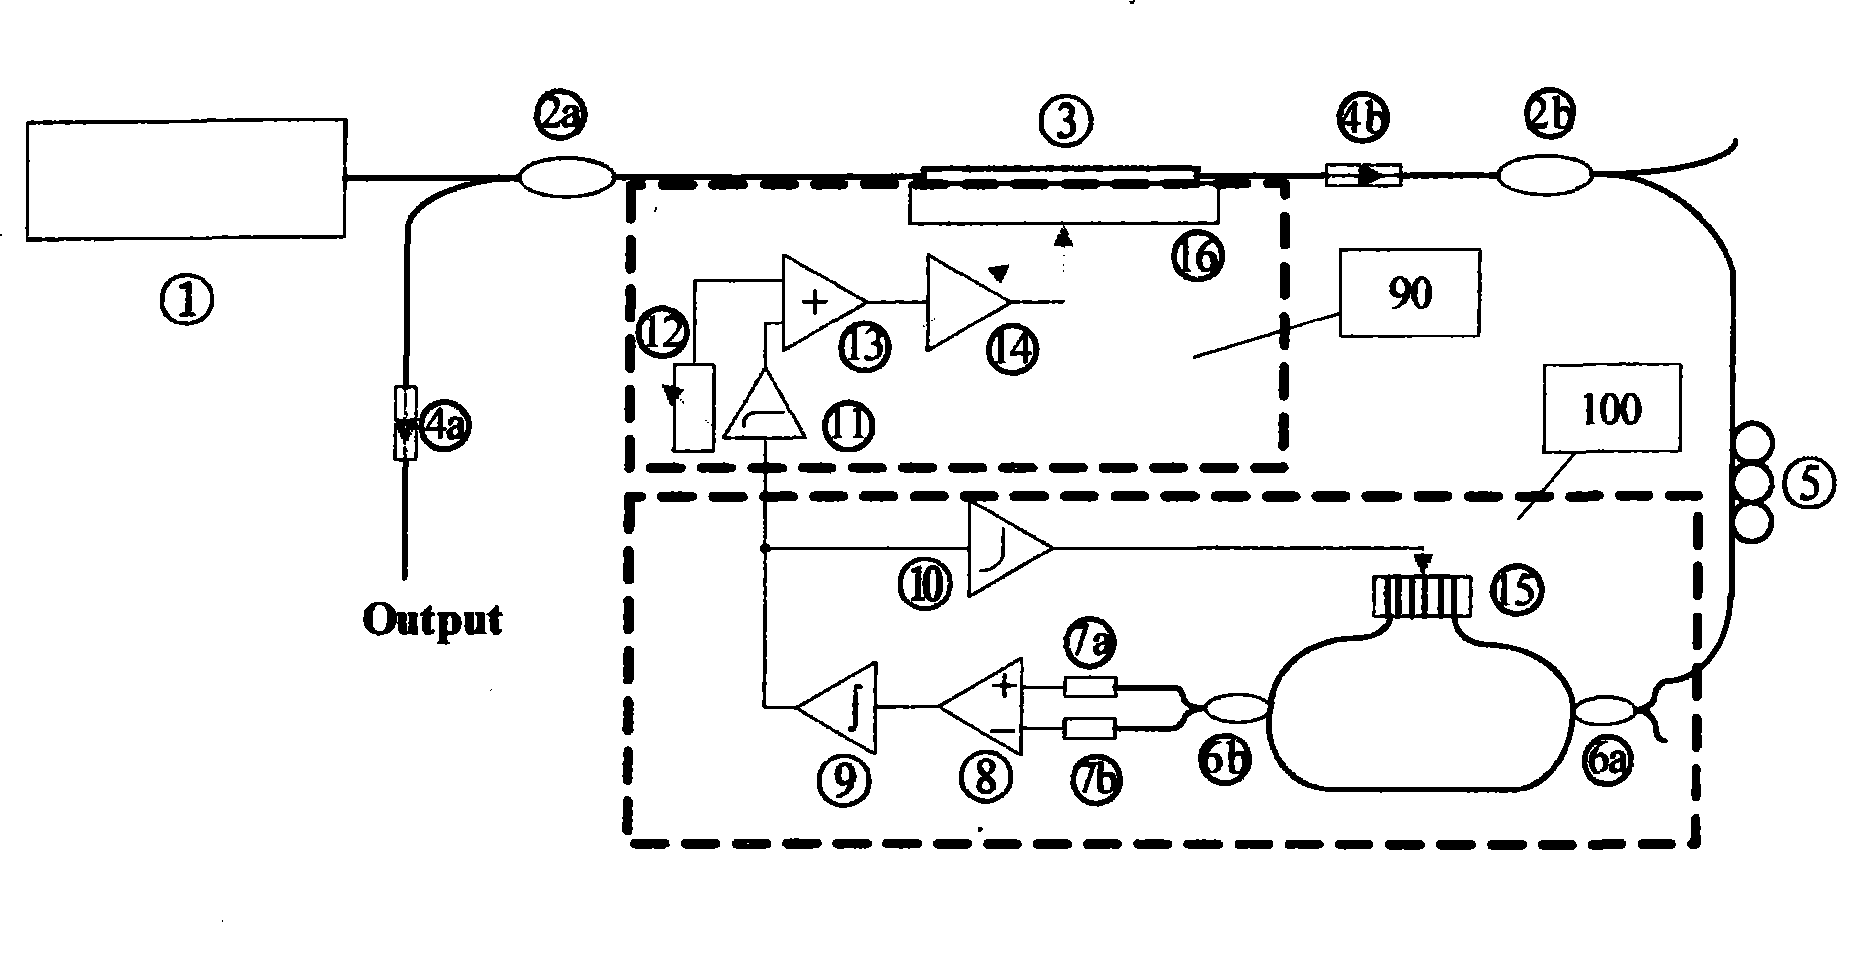 Apparatus for distributed feedback optical fiber laser frequency modulation and denoising